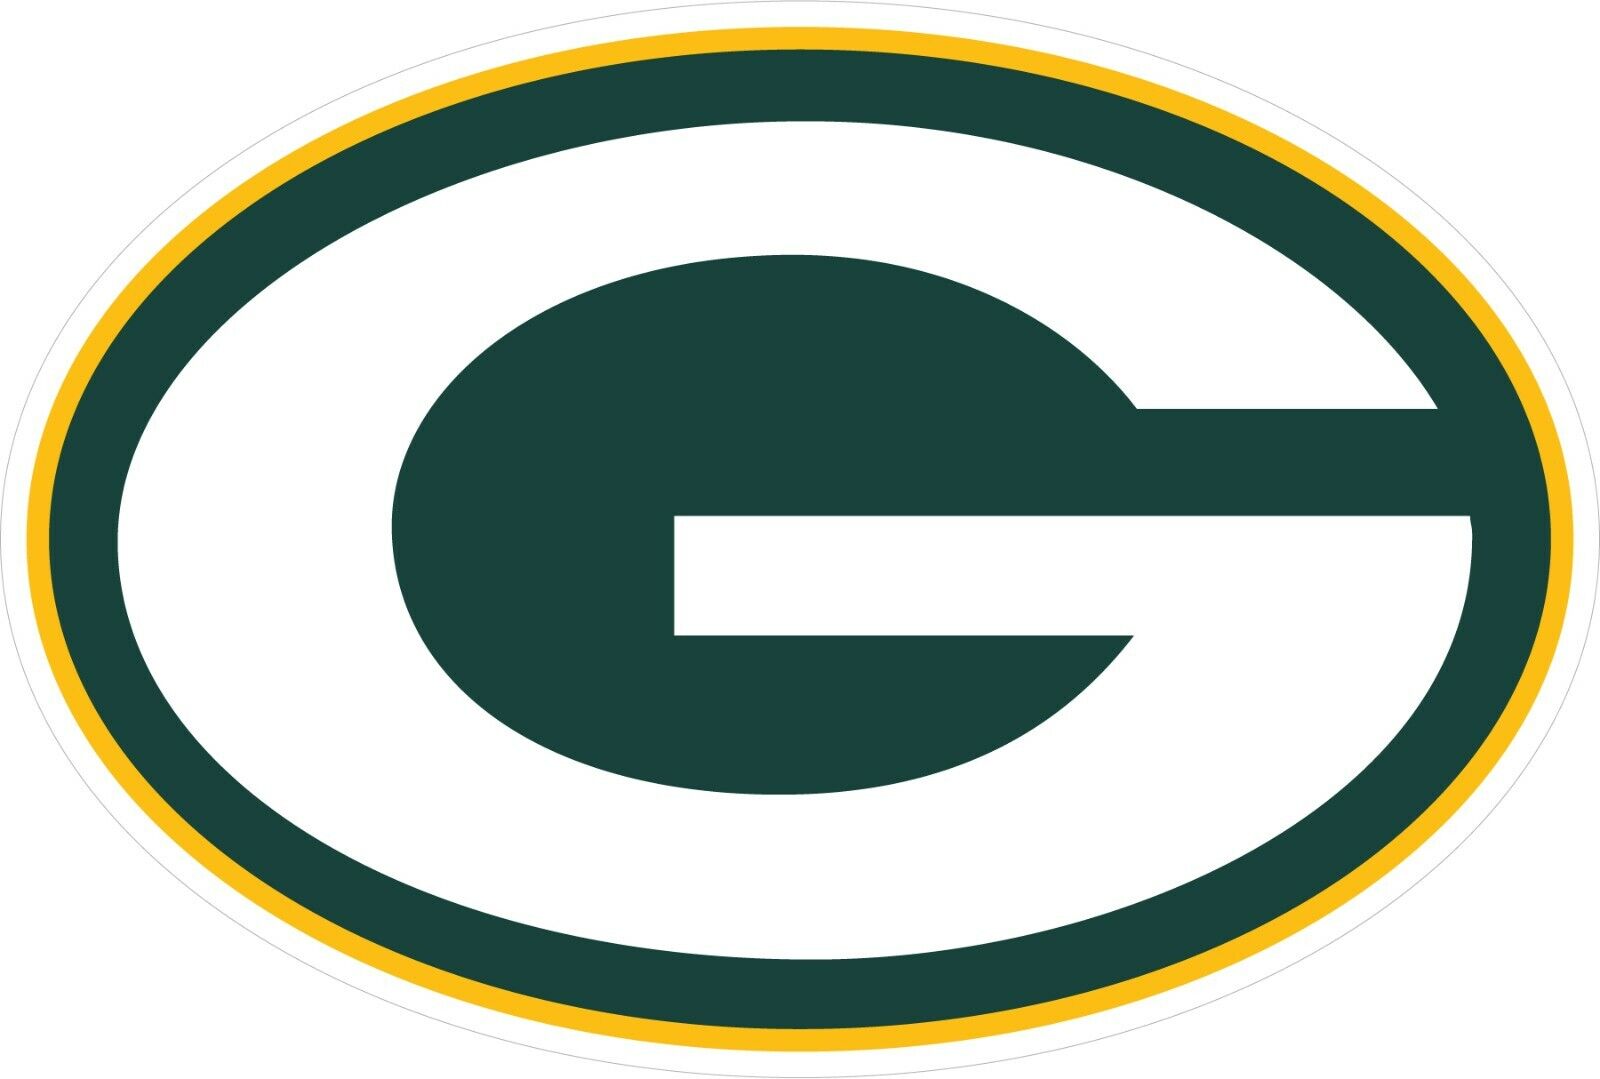 Green Bay Packers  Vinyl Decal, Sticker - for Cars, Walls, Cornhole Boards